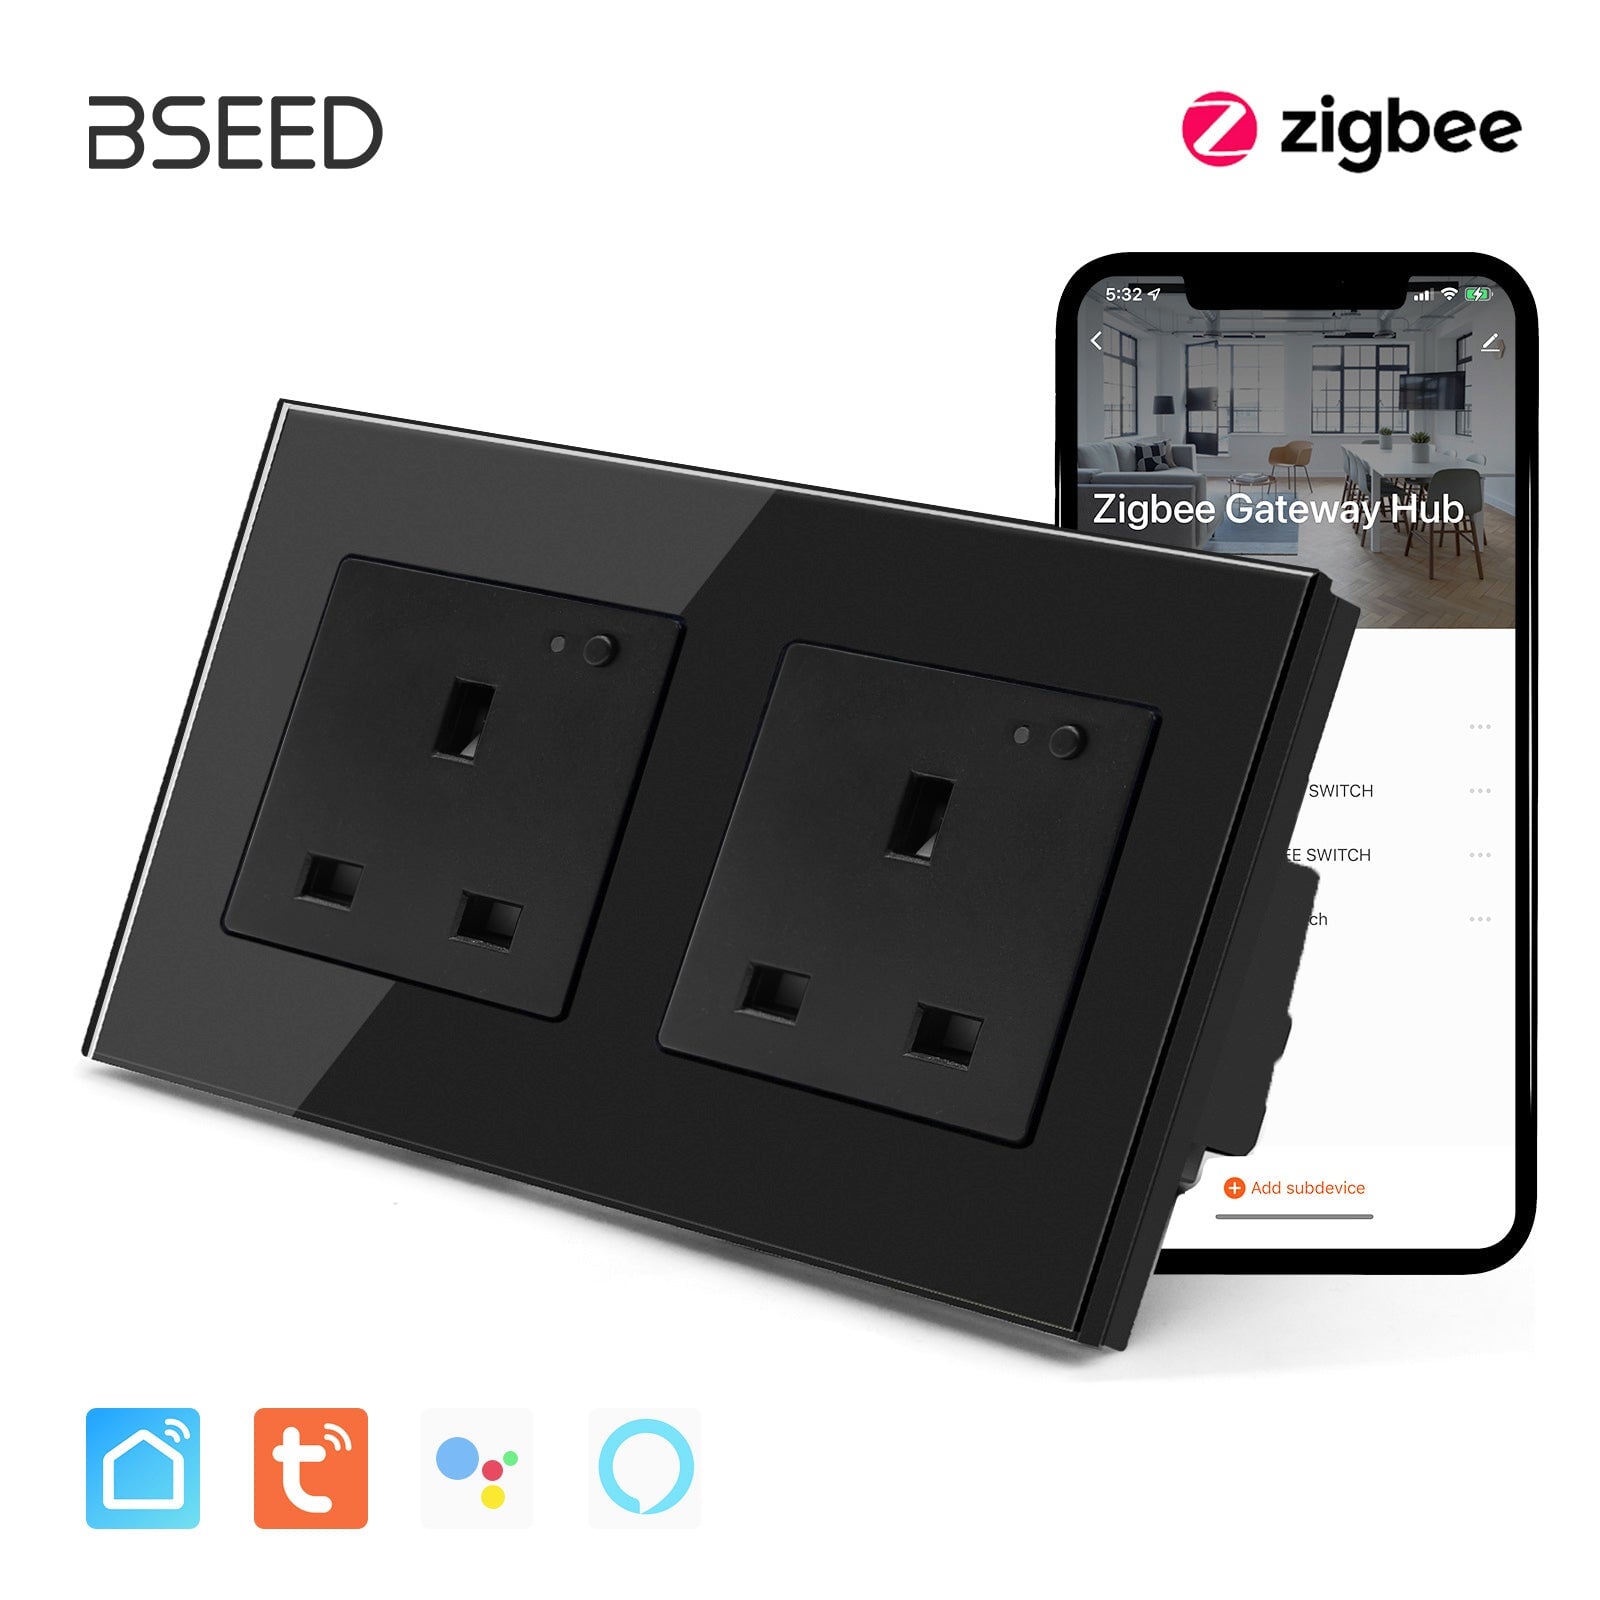 BSEED ZigBee UK Wall Sockets Power Outlets Kids Protection Wall Plates & Covers Bseedswitch black Double 